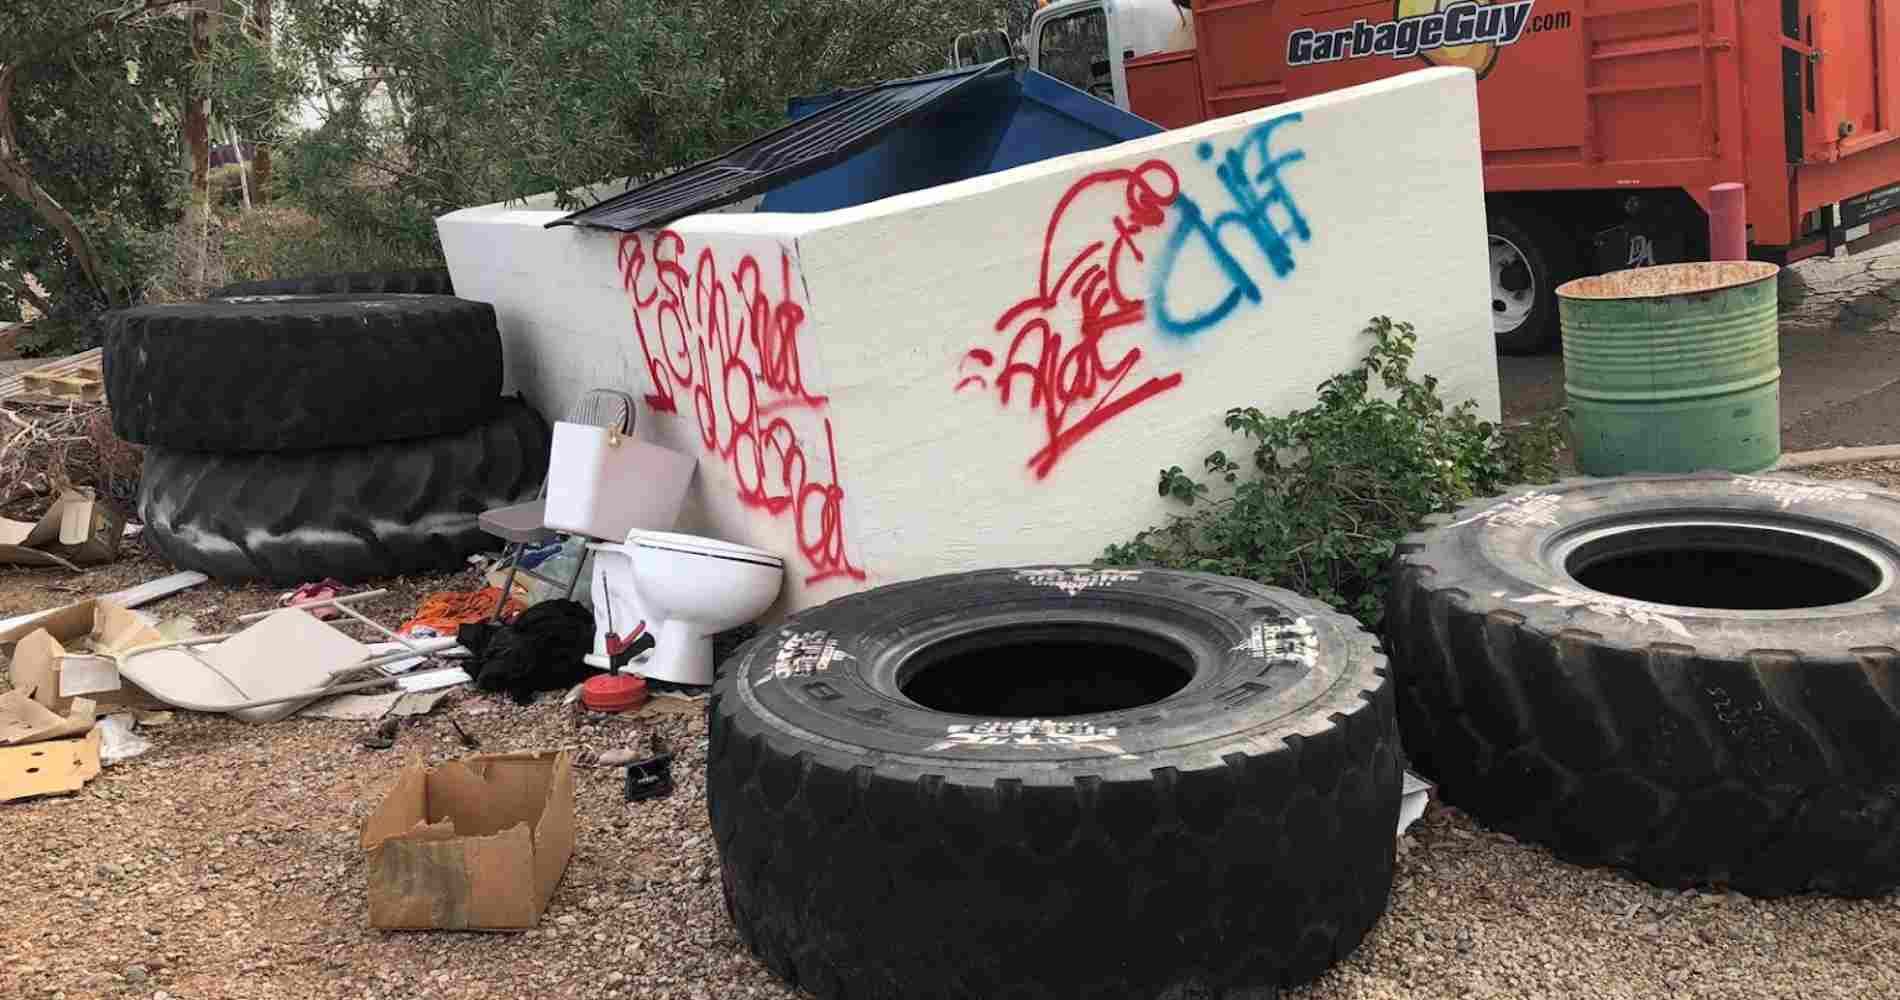 #1 for Tire Disposal in Sun City, AZ with Over 1200 5-Star Reviews!